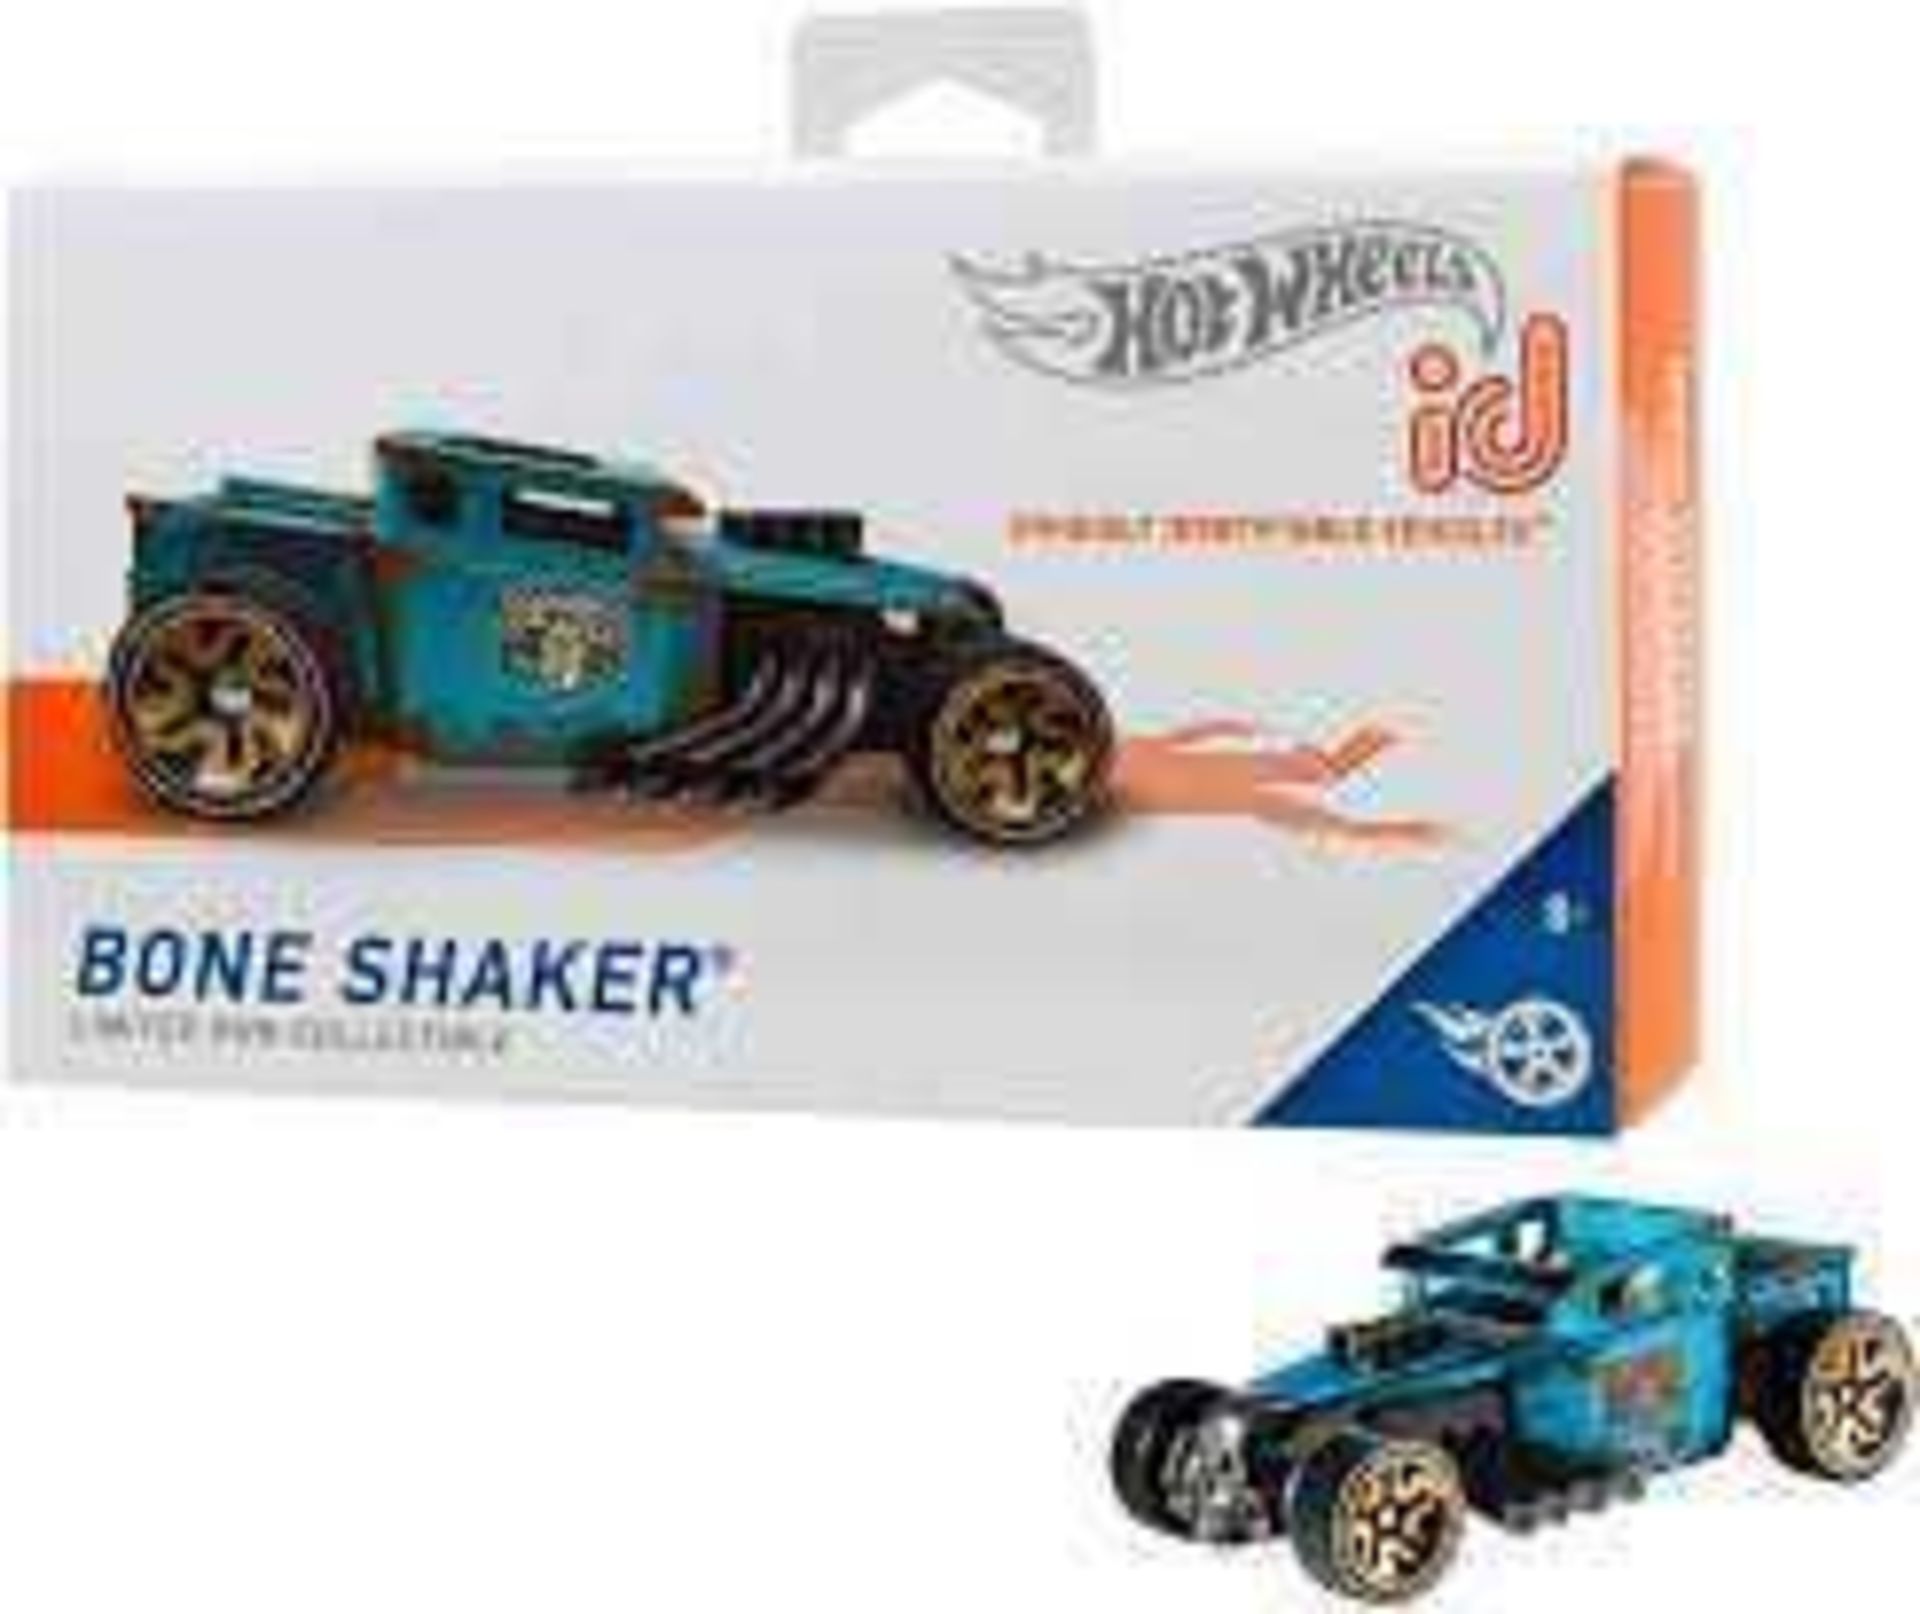 Combined RRP £100. Lot To Contain 10 Boxed Bone Shaker Hotwheels Id Vehicles.